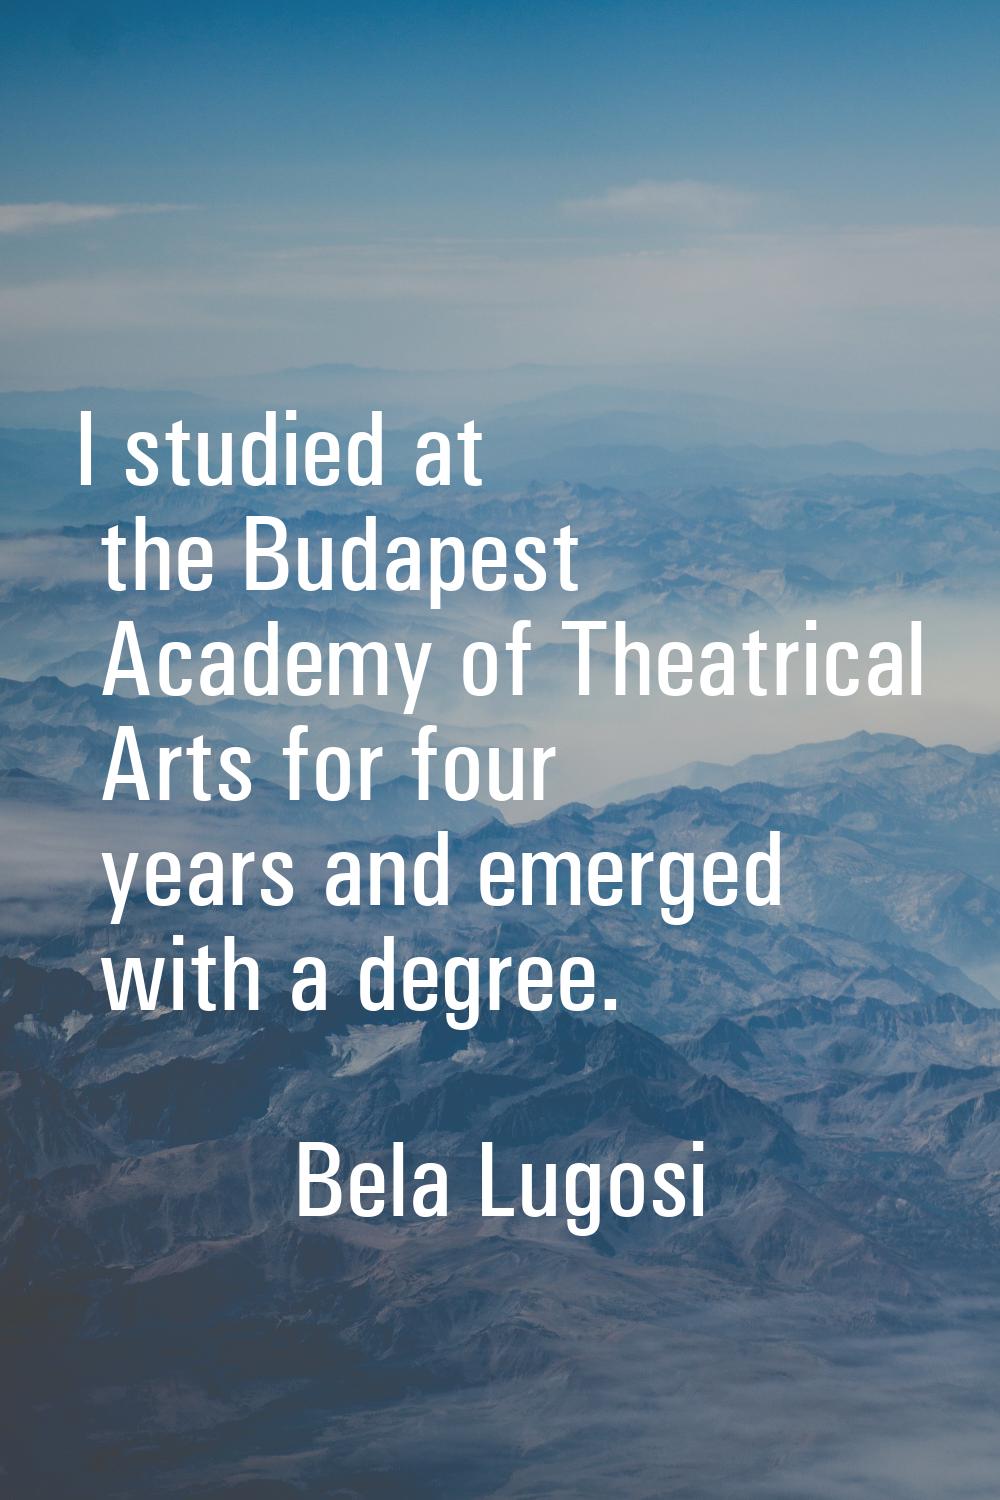 I studied at the Budapest Academy of Theatrical Arts for four years and emerged with a degree.